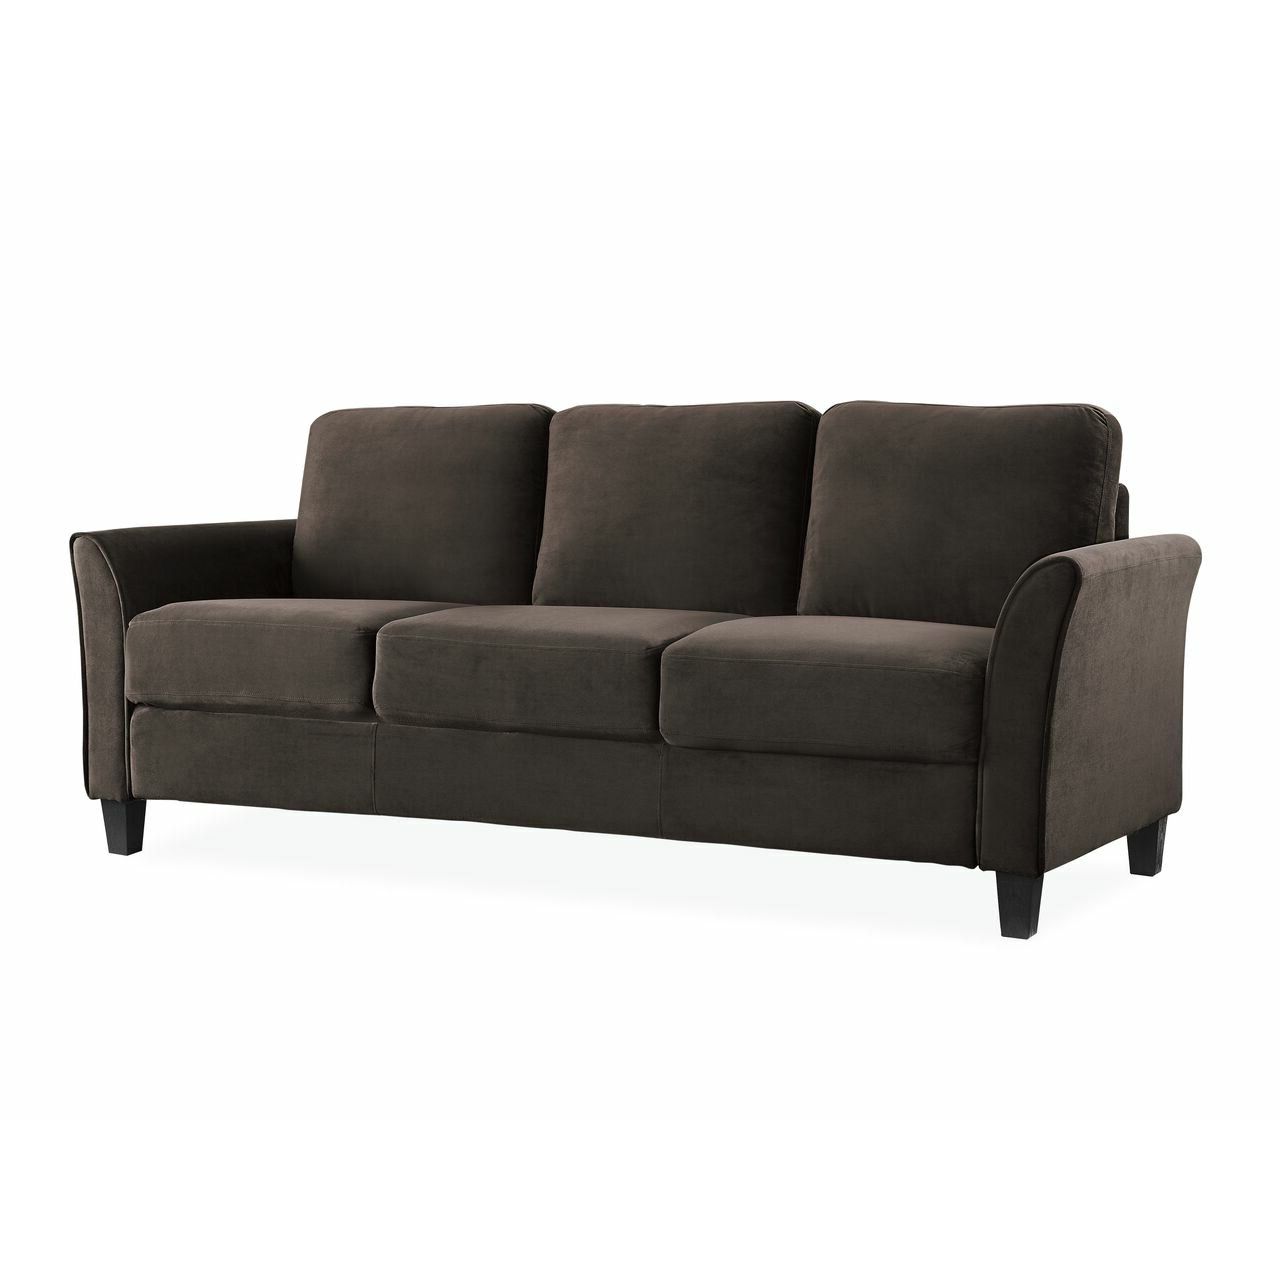 Wayfair Pertaining To Sofas With Curved Arms (View 8 of 15)